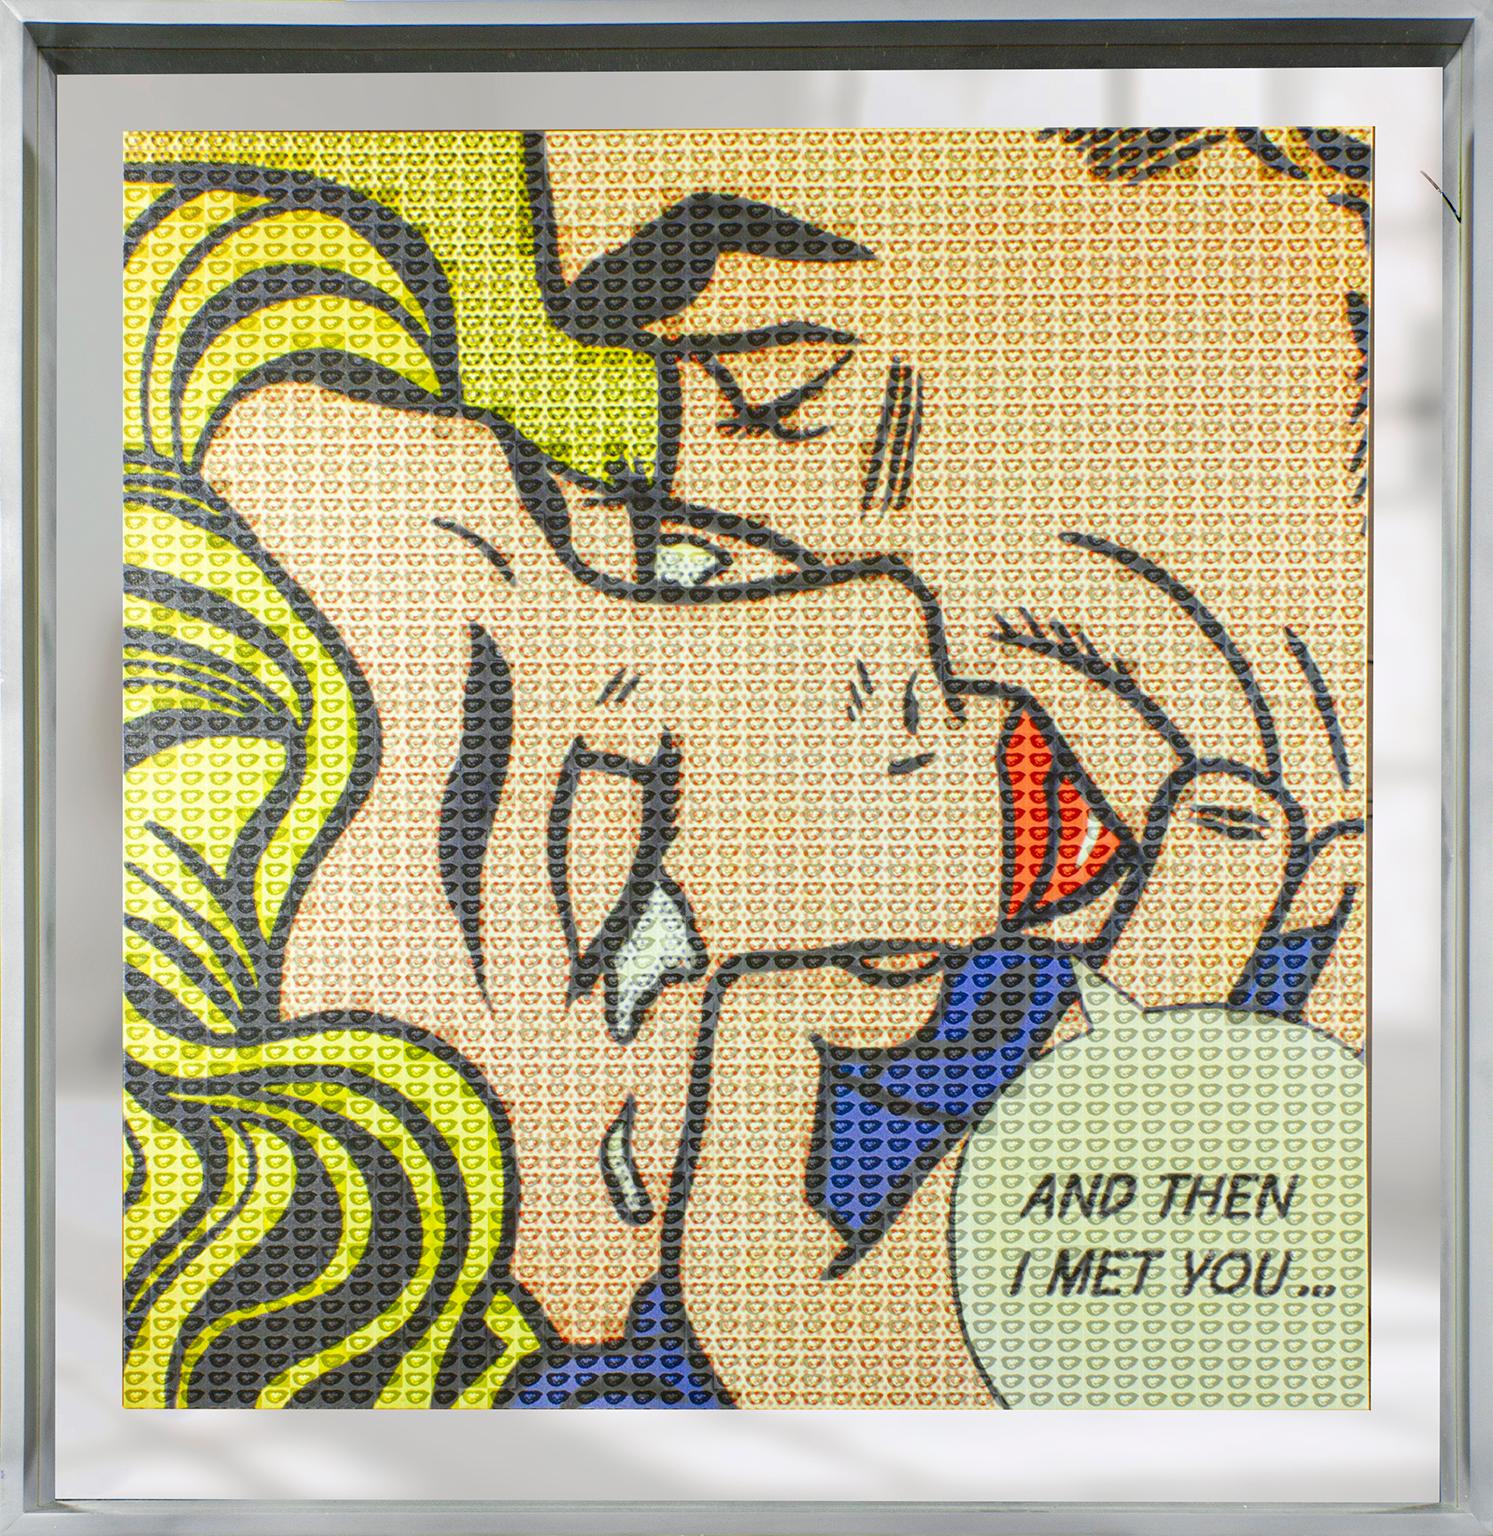 Alex Guofeng Cao Figurative Print - "A Thousand Kisses Deep, Lichtenstein vs. Warhol" ink and oil on canvas, mirror